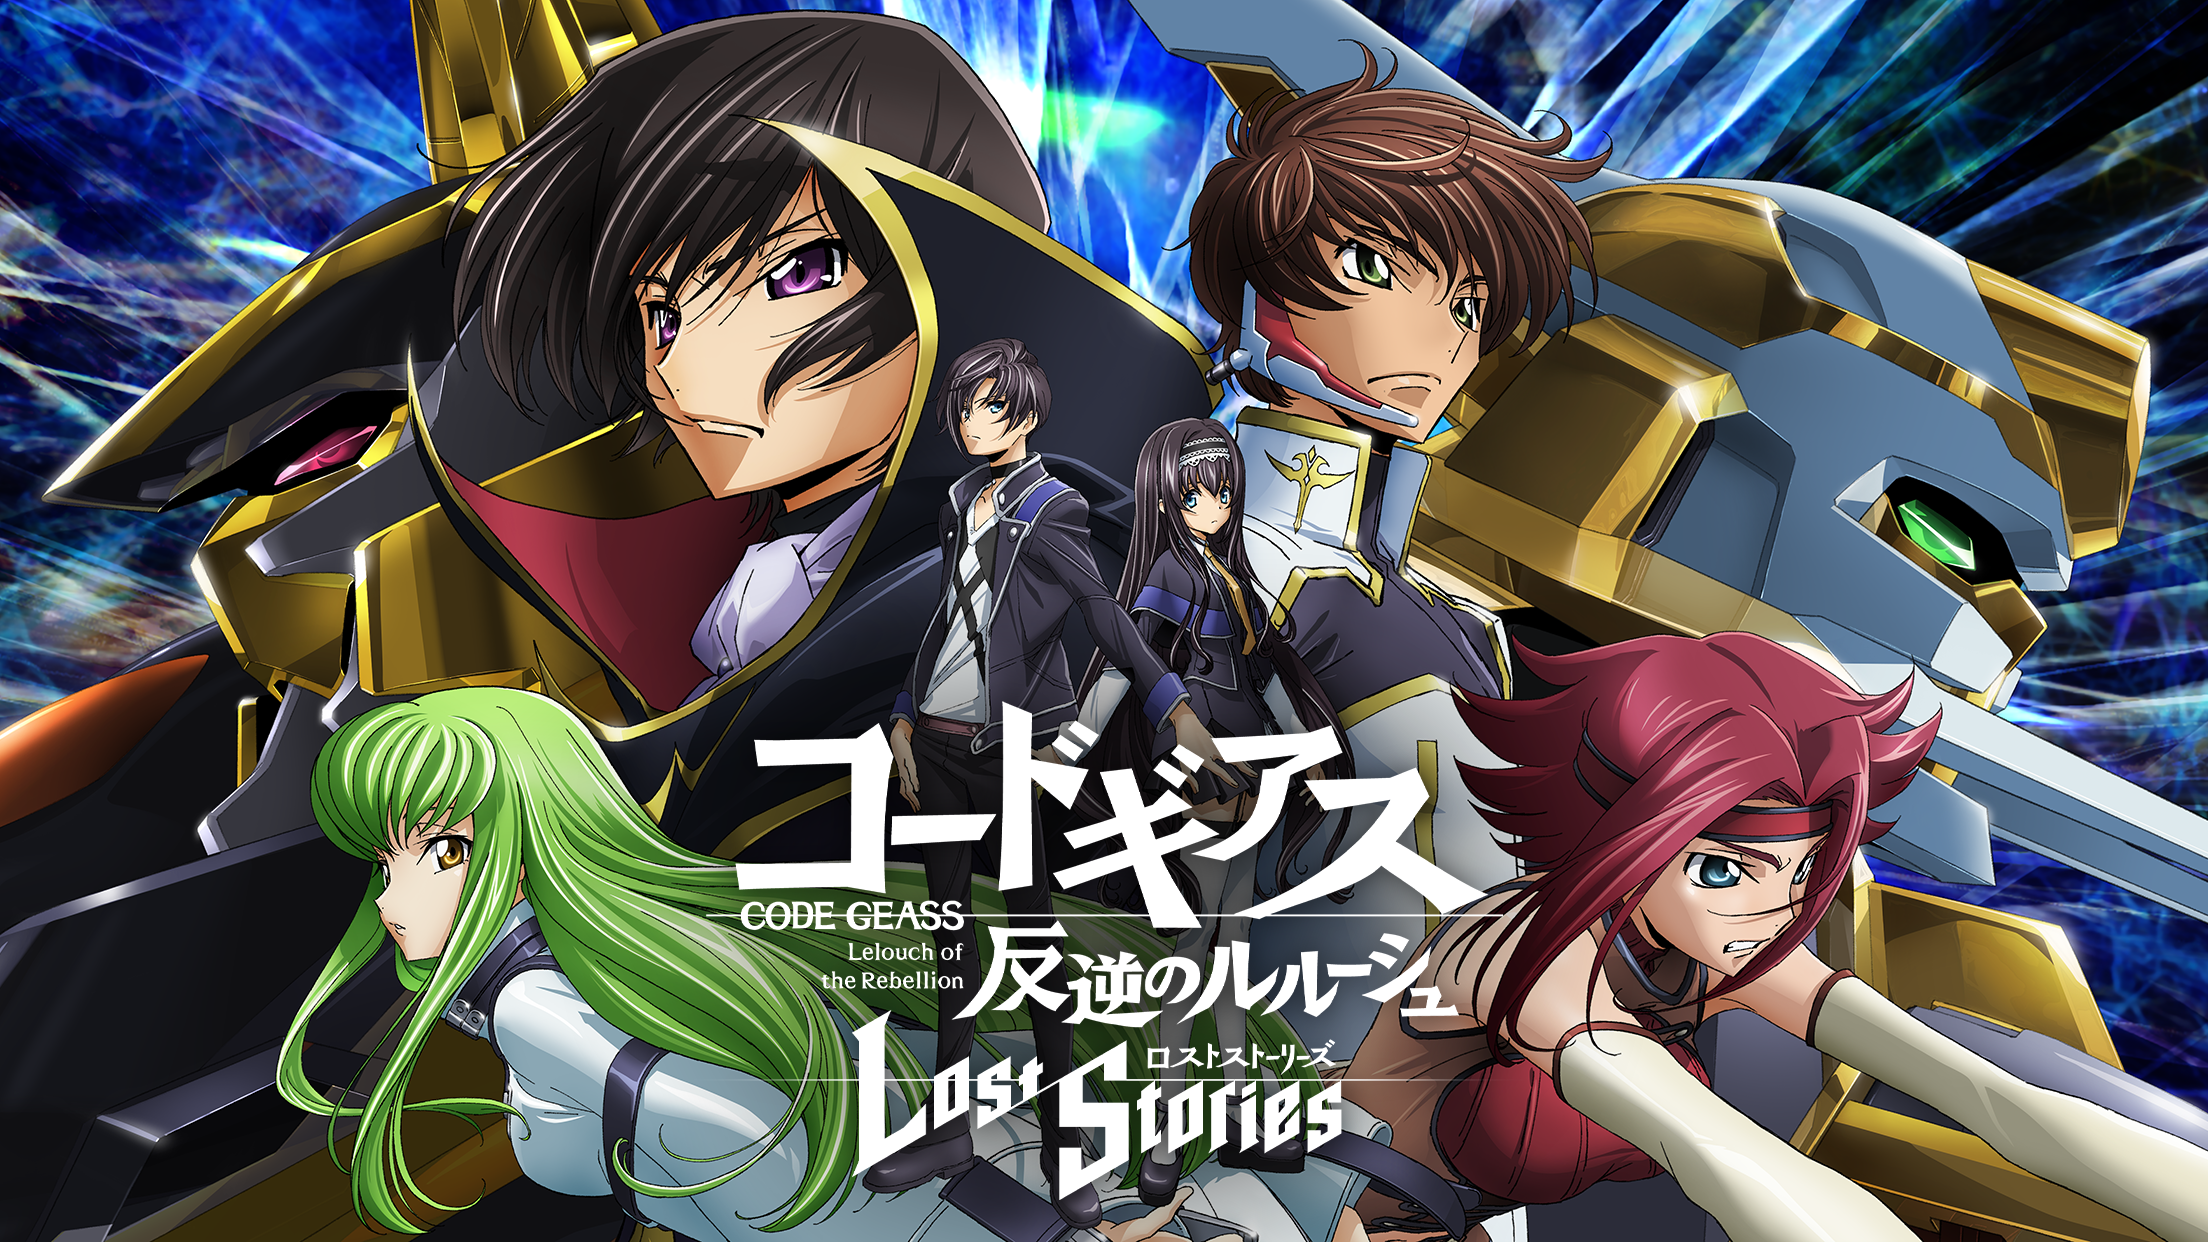 Screenshot 1 of Code Geass: Lelouch of the Rebellion Lost Stories 1.3.37